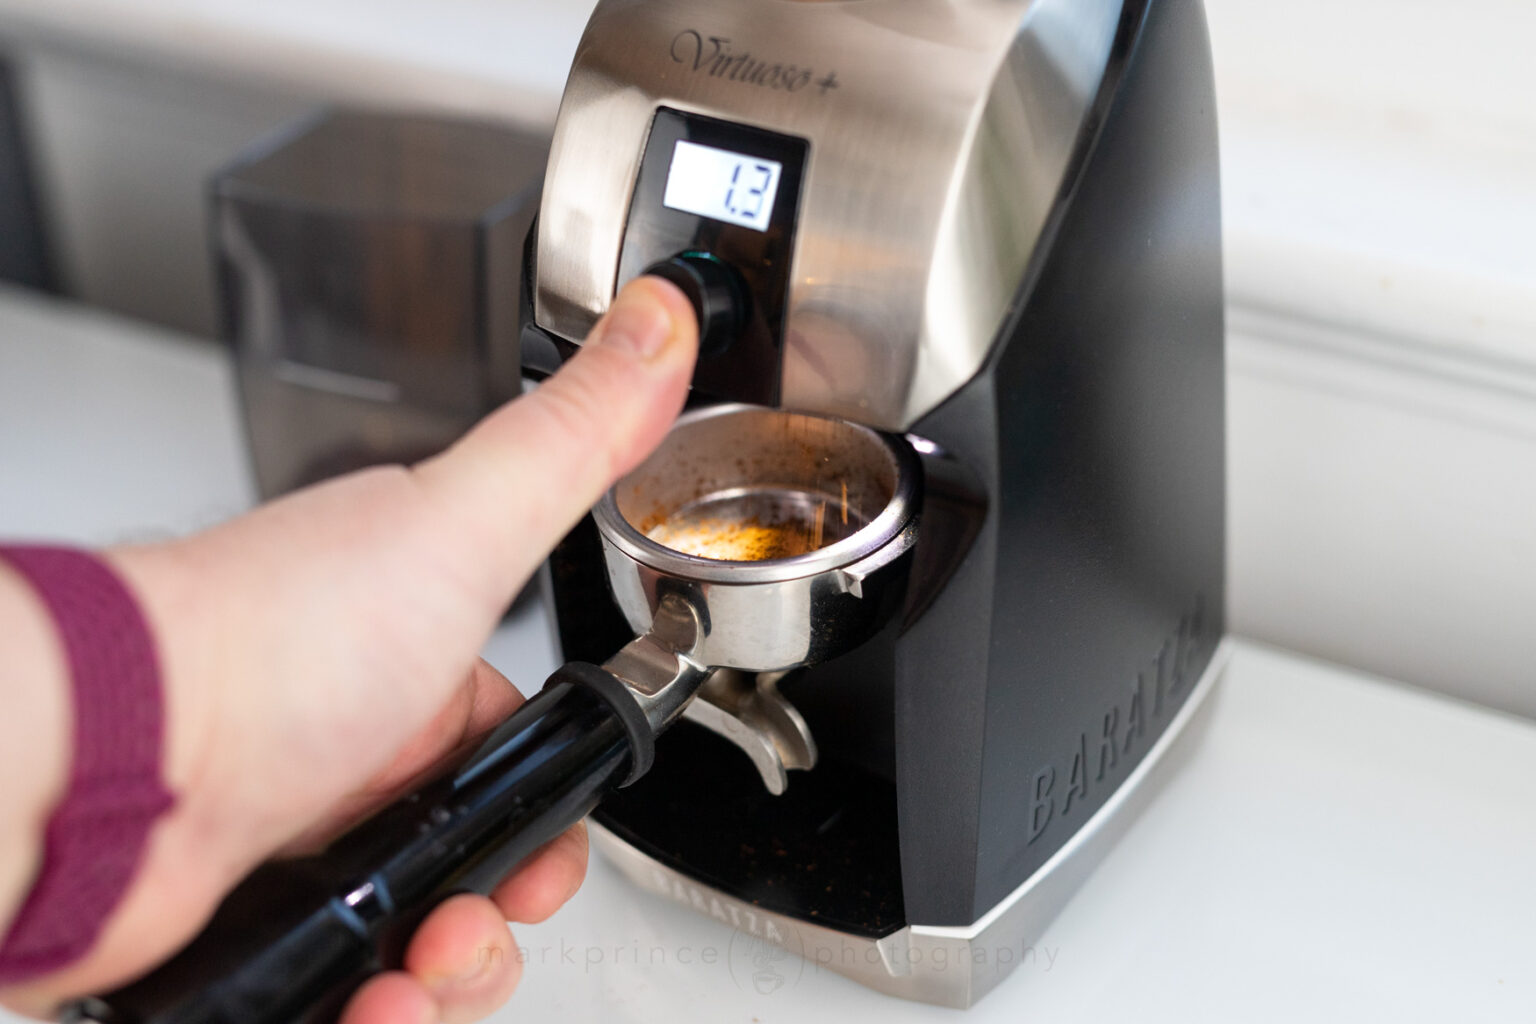 Like the previous Virtuoso, you can grind directly into. a portafilter with the Virtuoso+